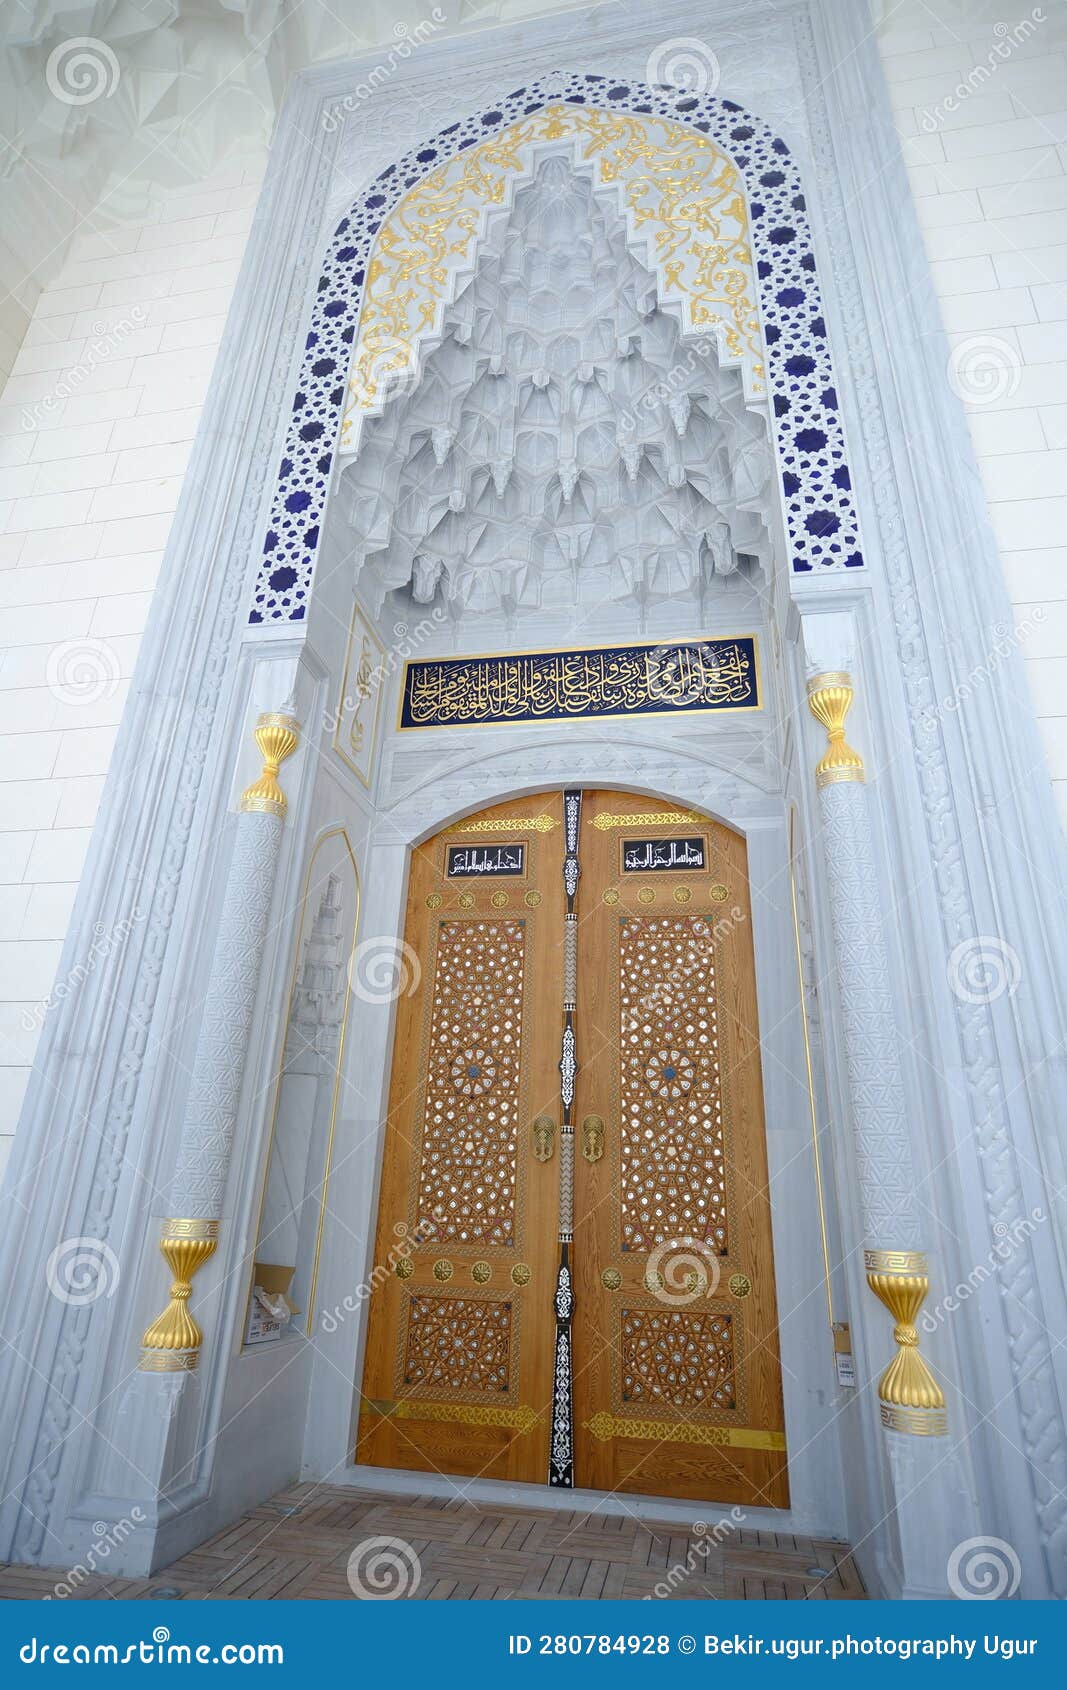 barbaros hayrettin psha mosque - levent mosque is a modern mosque located in the levent neighborhood